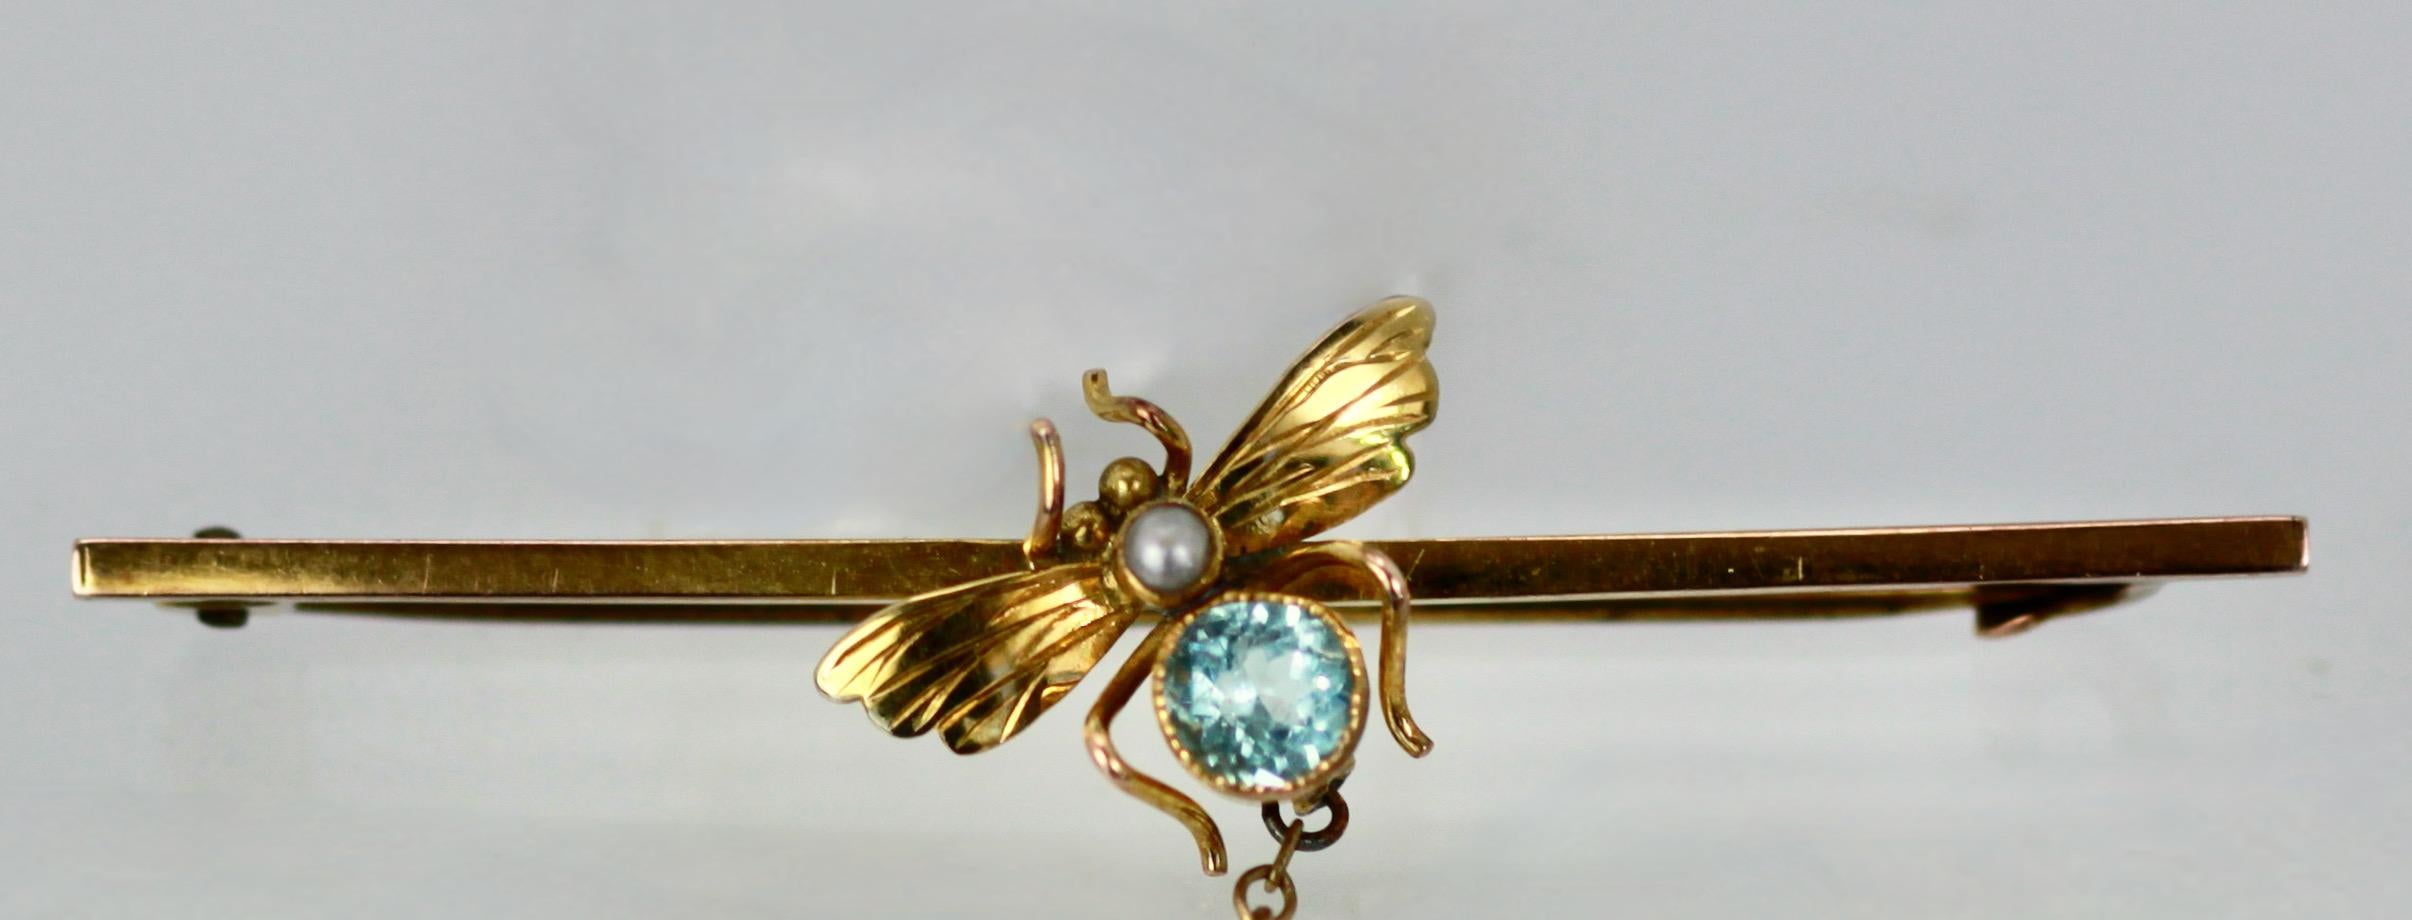 This lovely small brooch represents the 